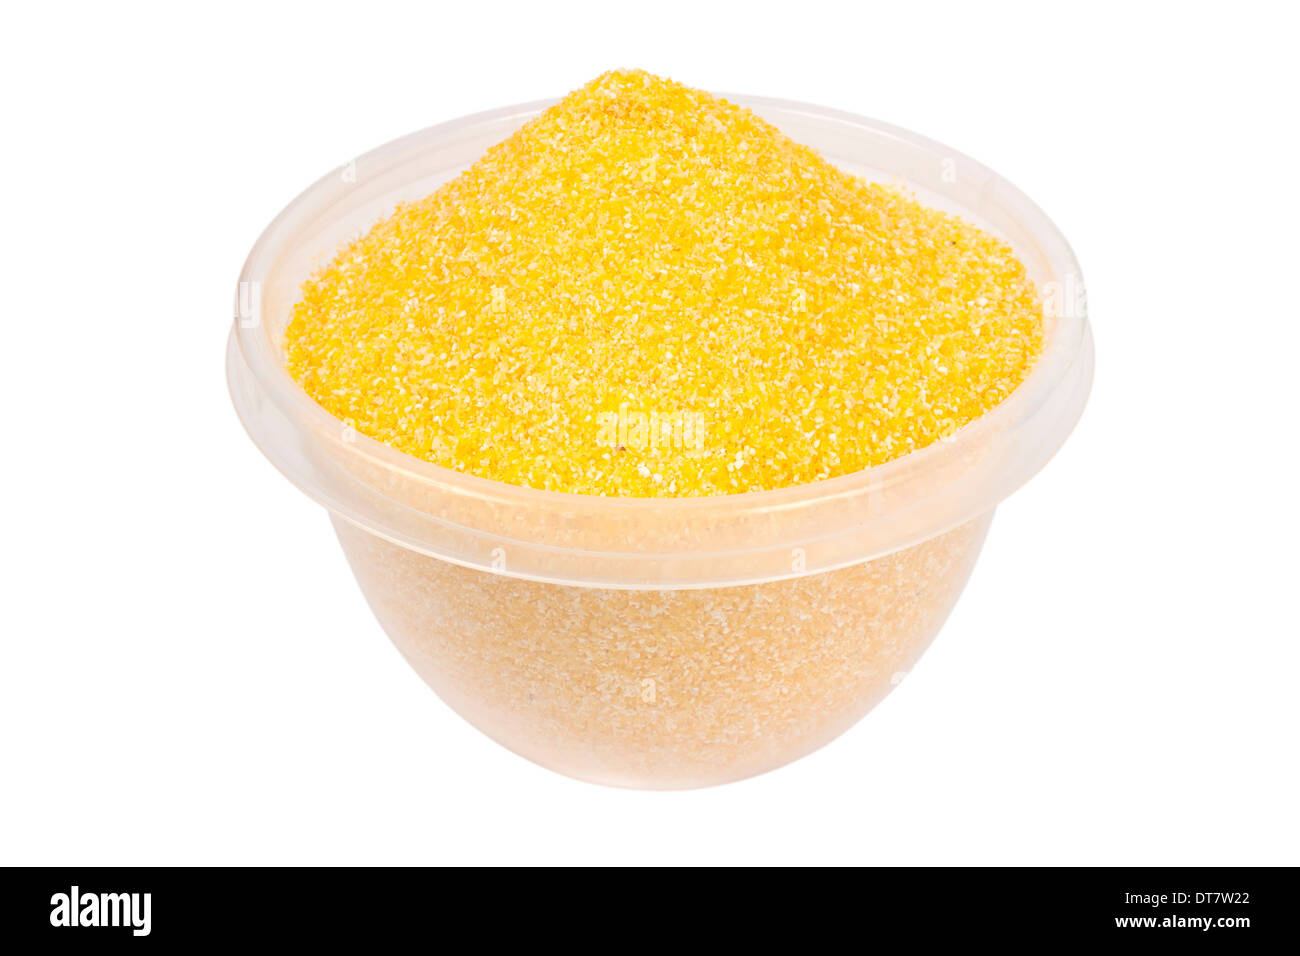 Corn flour in a plastic bowl, isolated on white background Stock Photo